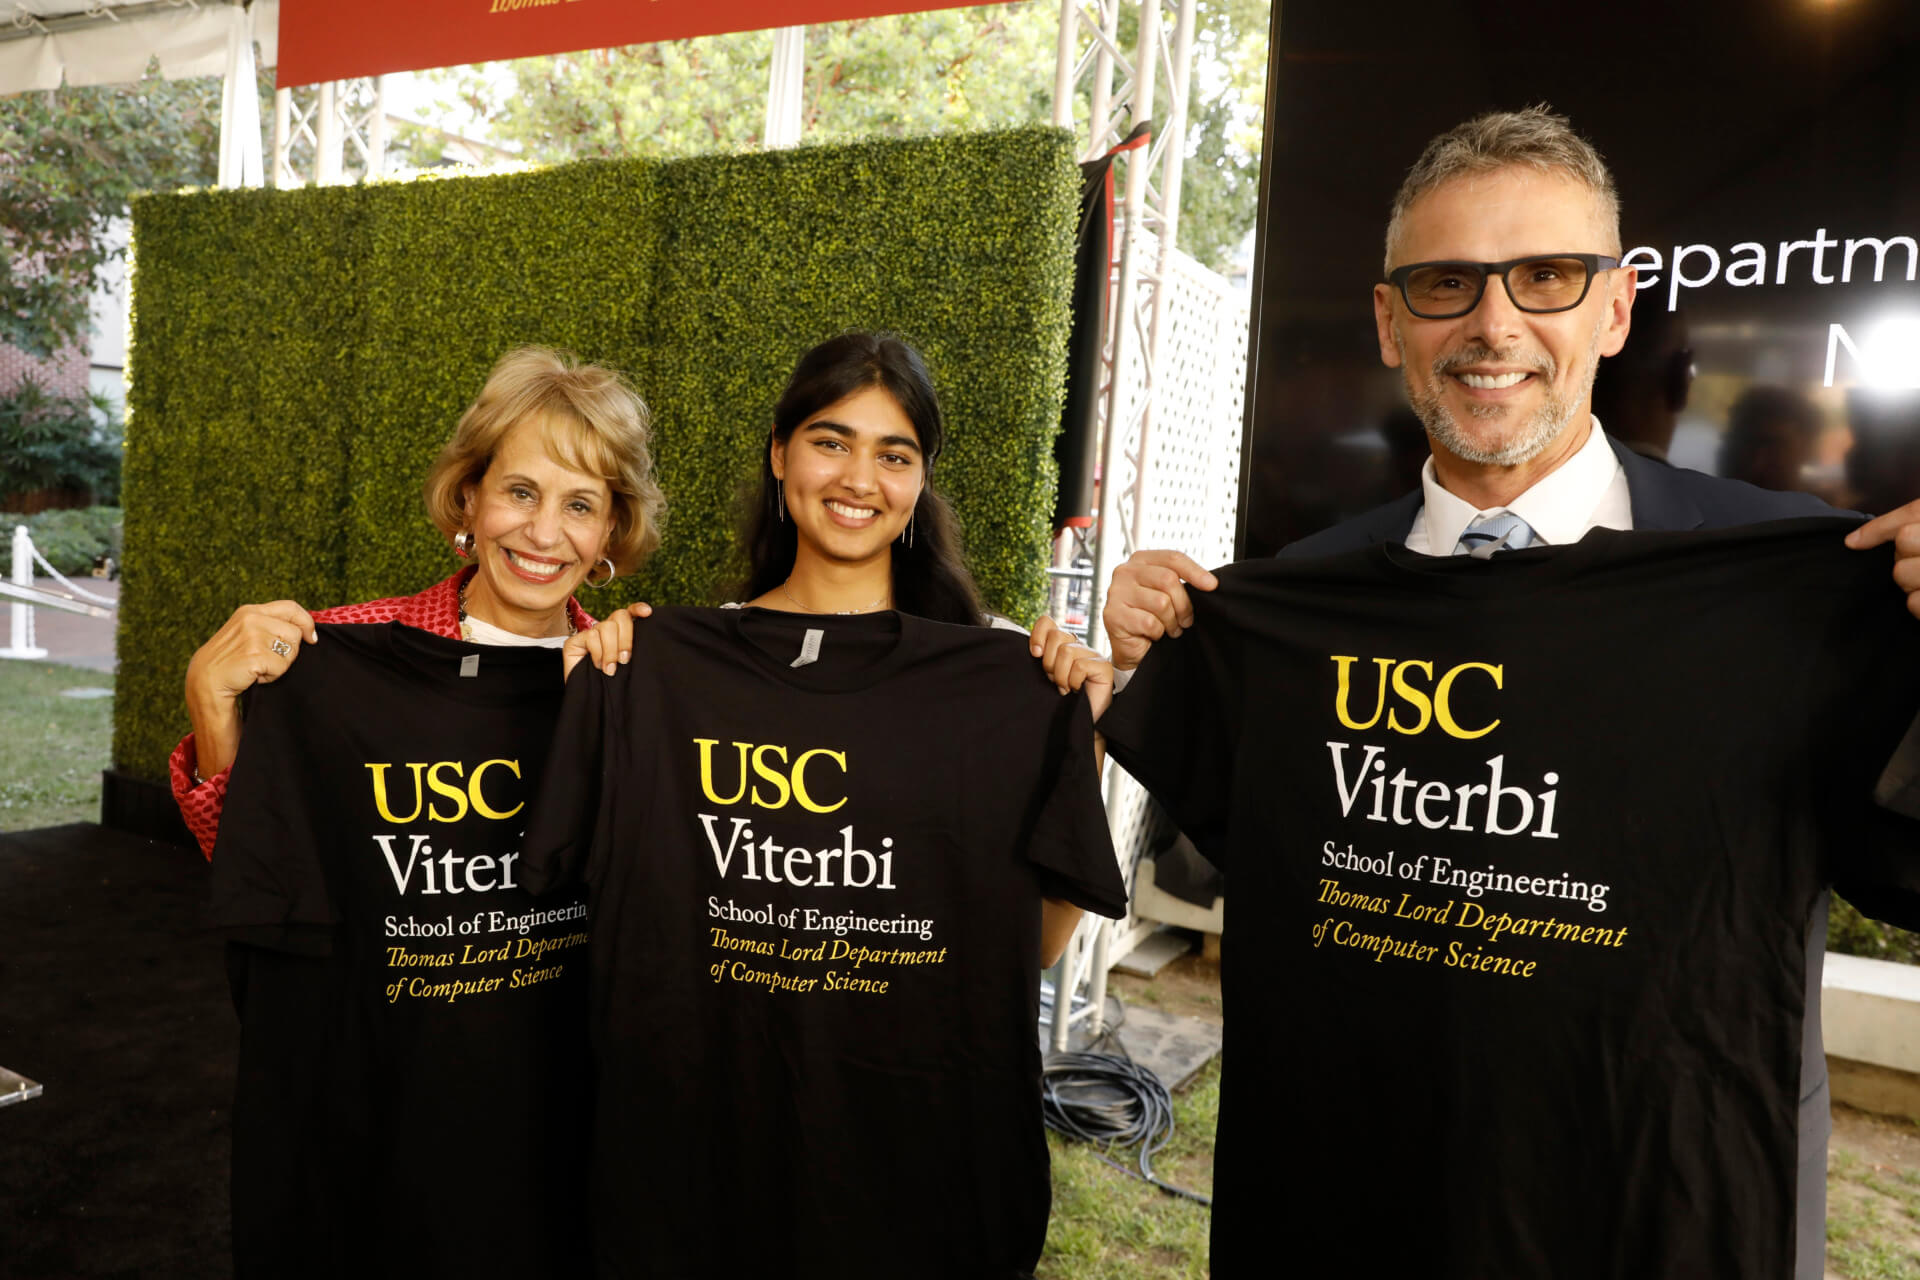 USC President Carol L. Folt with computer science student and speaker Lavanya Sharma and Chair of the Thomas Lord Department of Computer Science Nenad Medvidović. Photo/Steve Cohn.